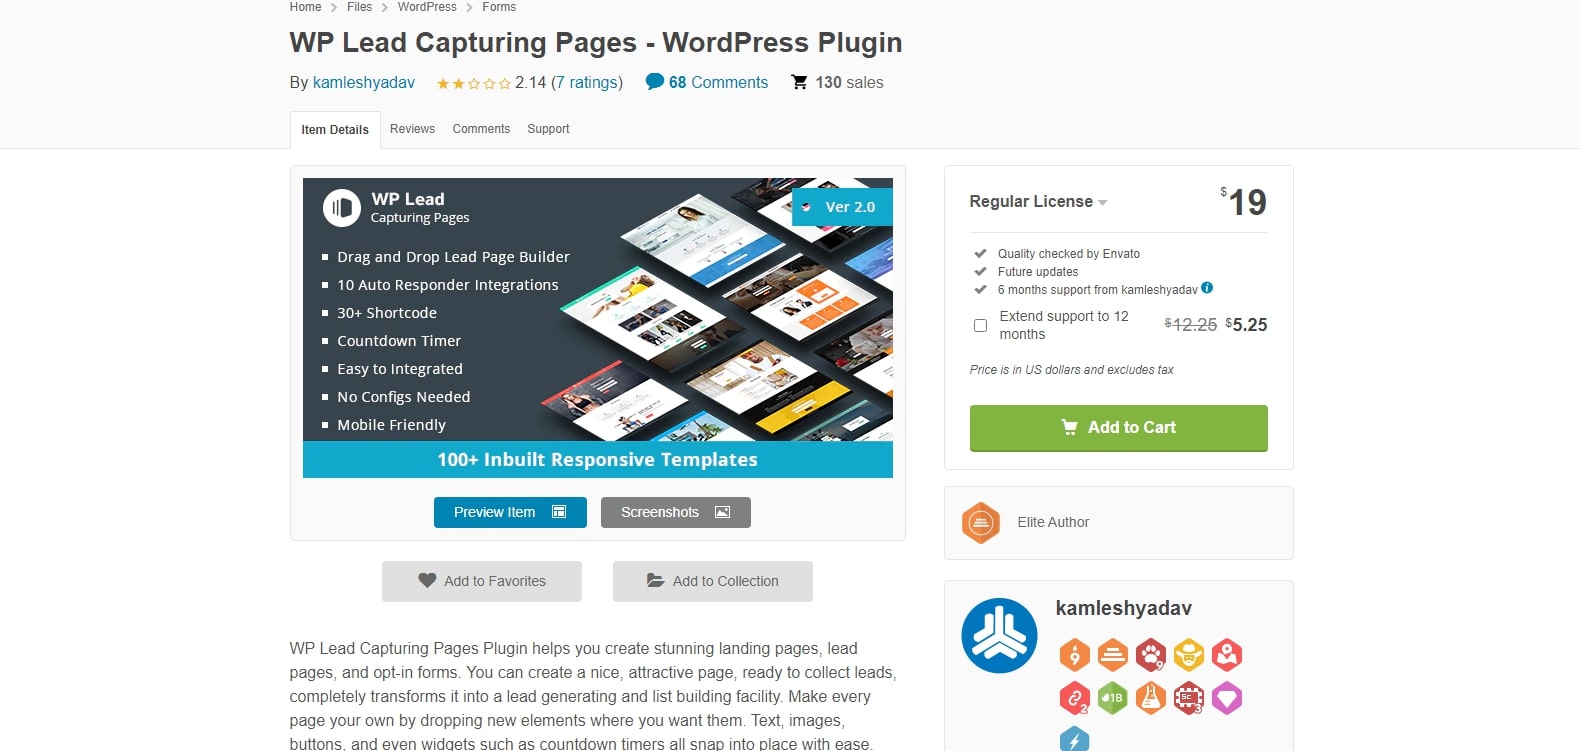 WP Lead Capturing Pages